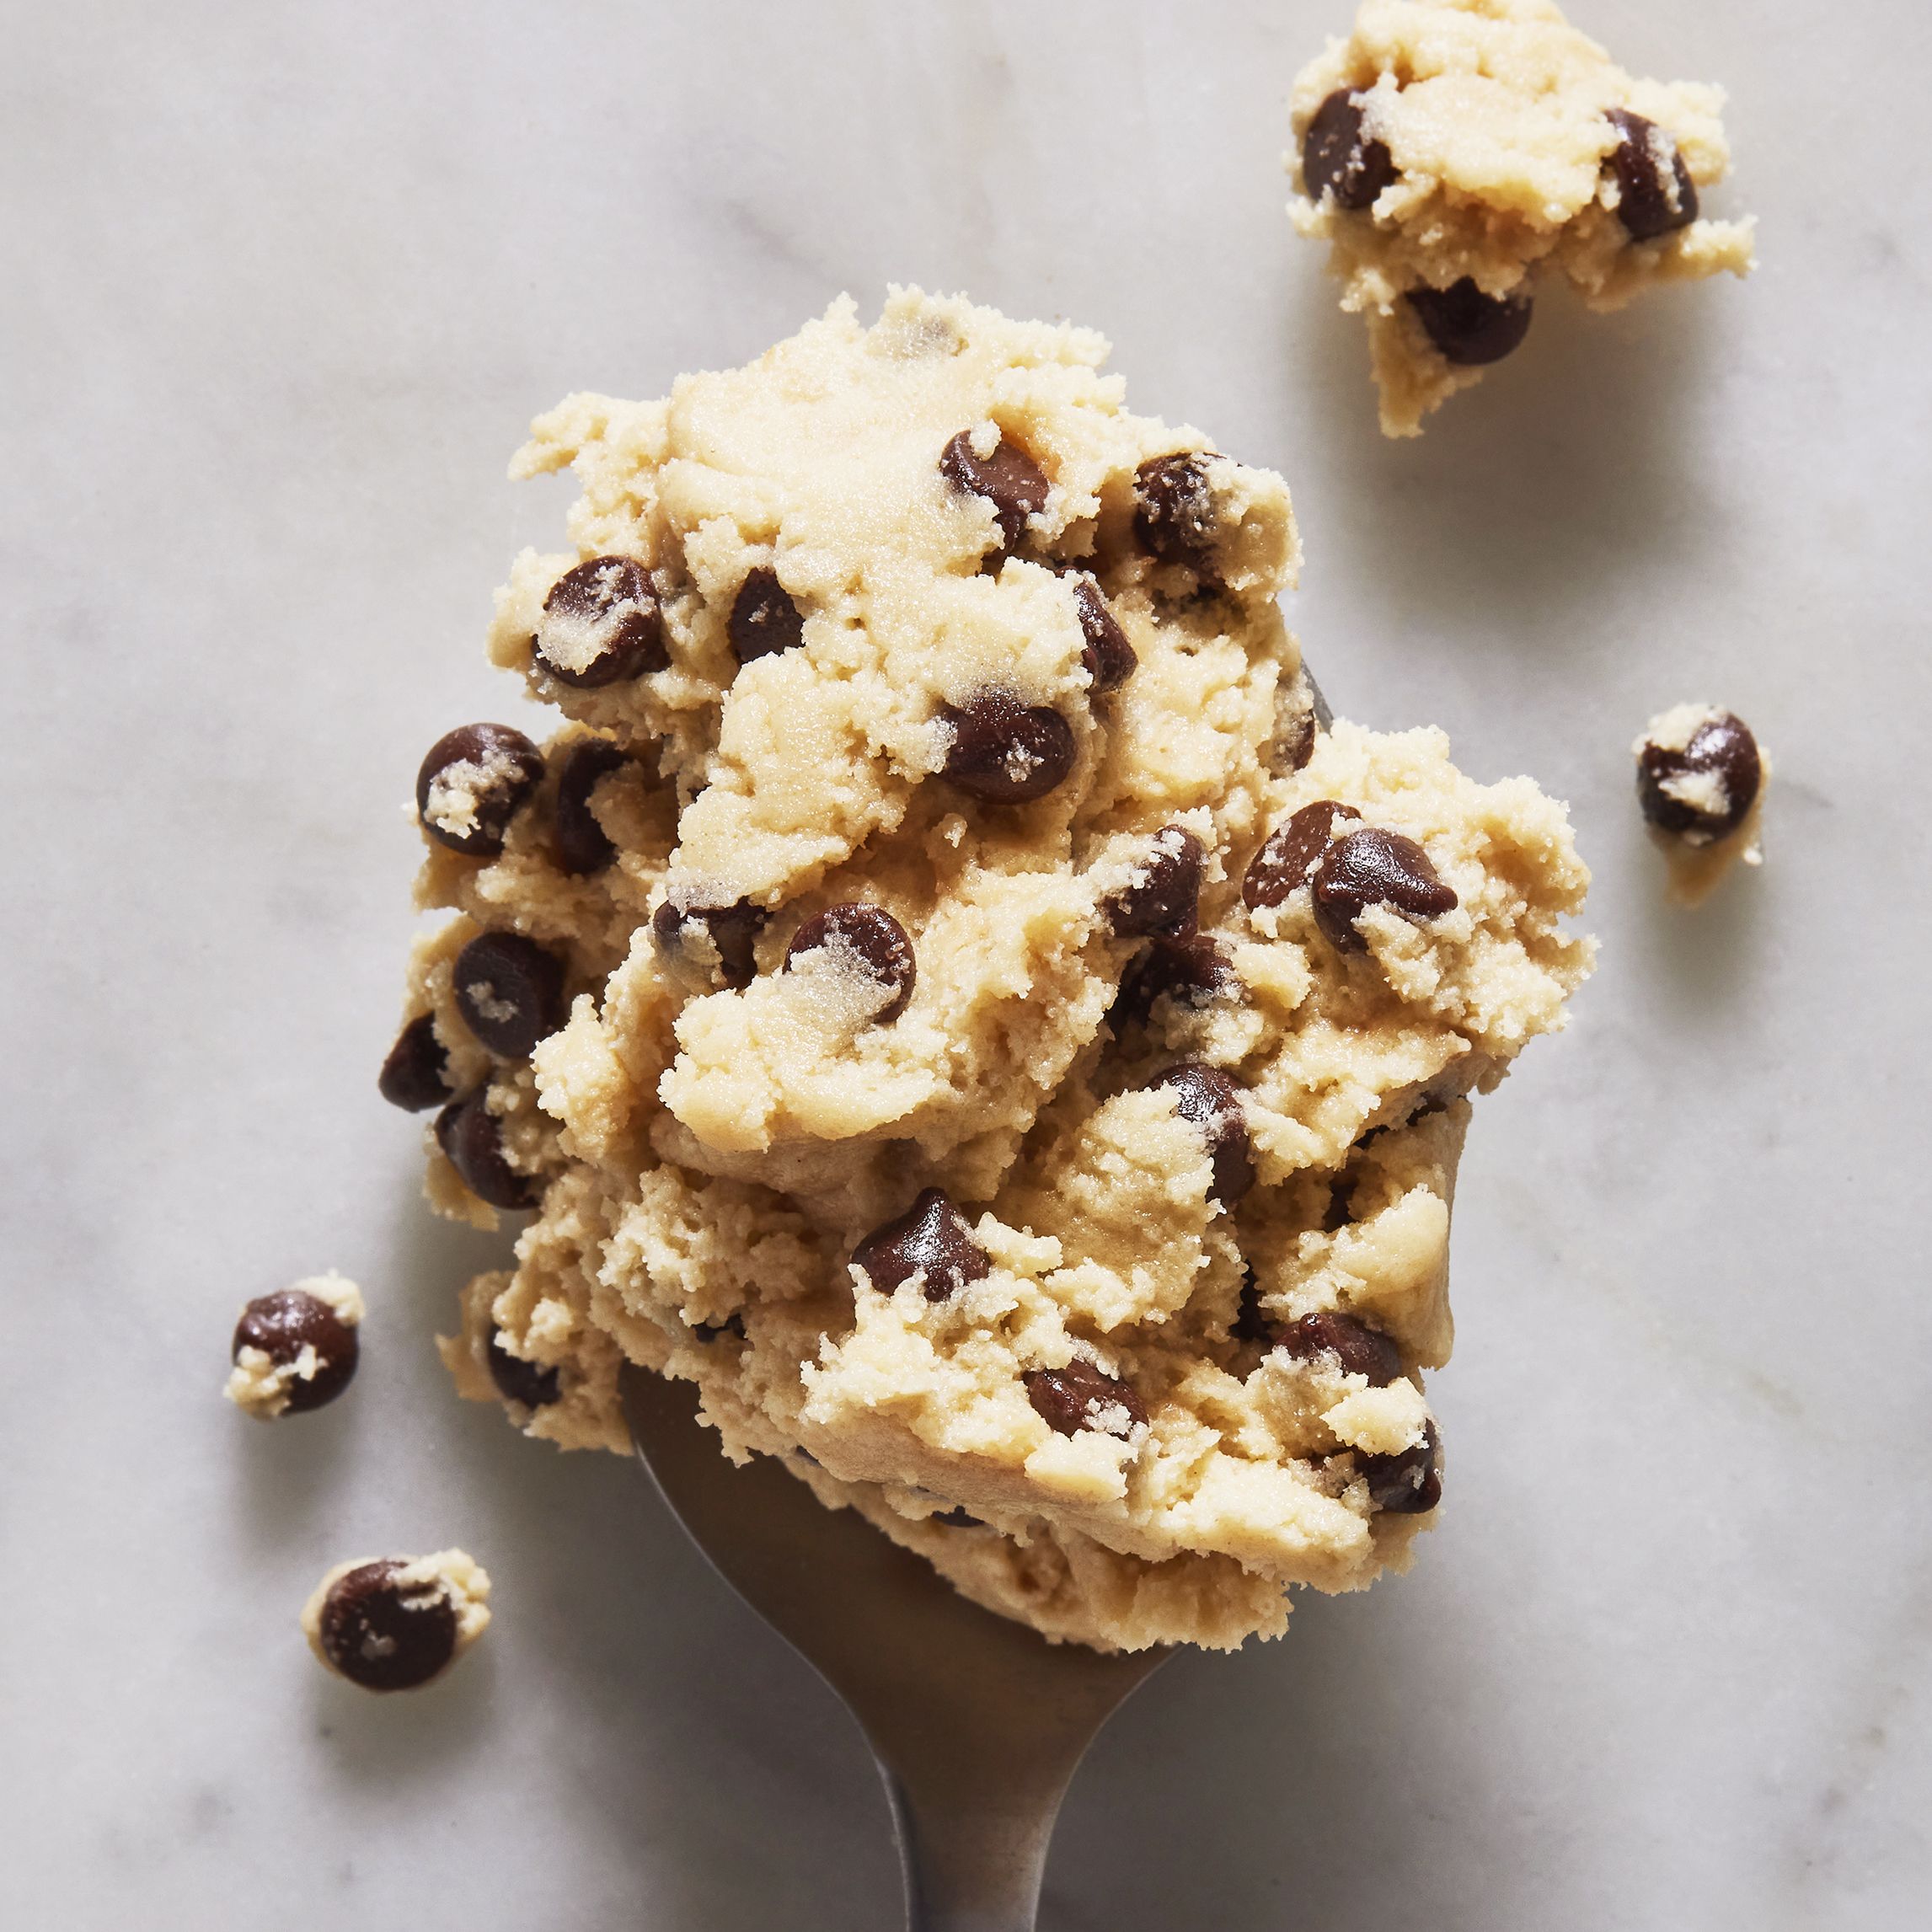 https://hips.hearstapps.com/hmg-prod/images/del089923-edible-cookie-dough-web-072-rv-secondary-copy-64dbae7ddbc91.jpg